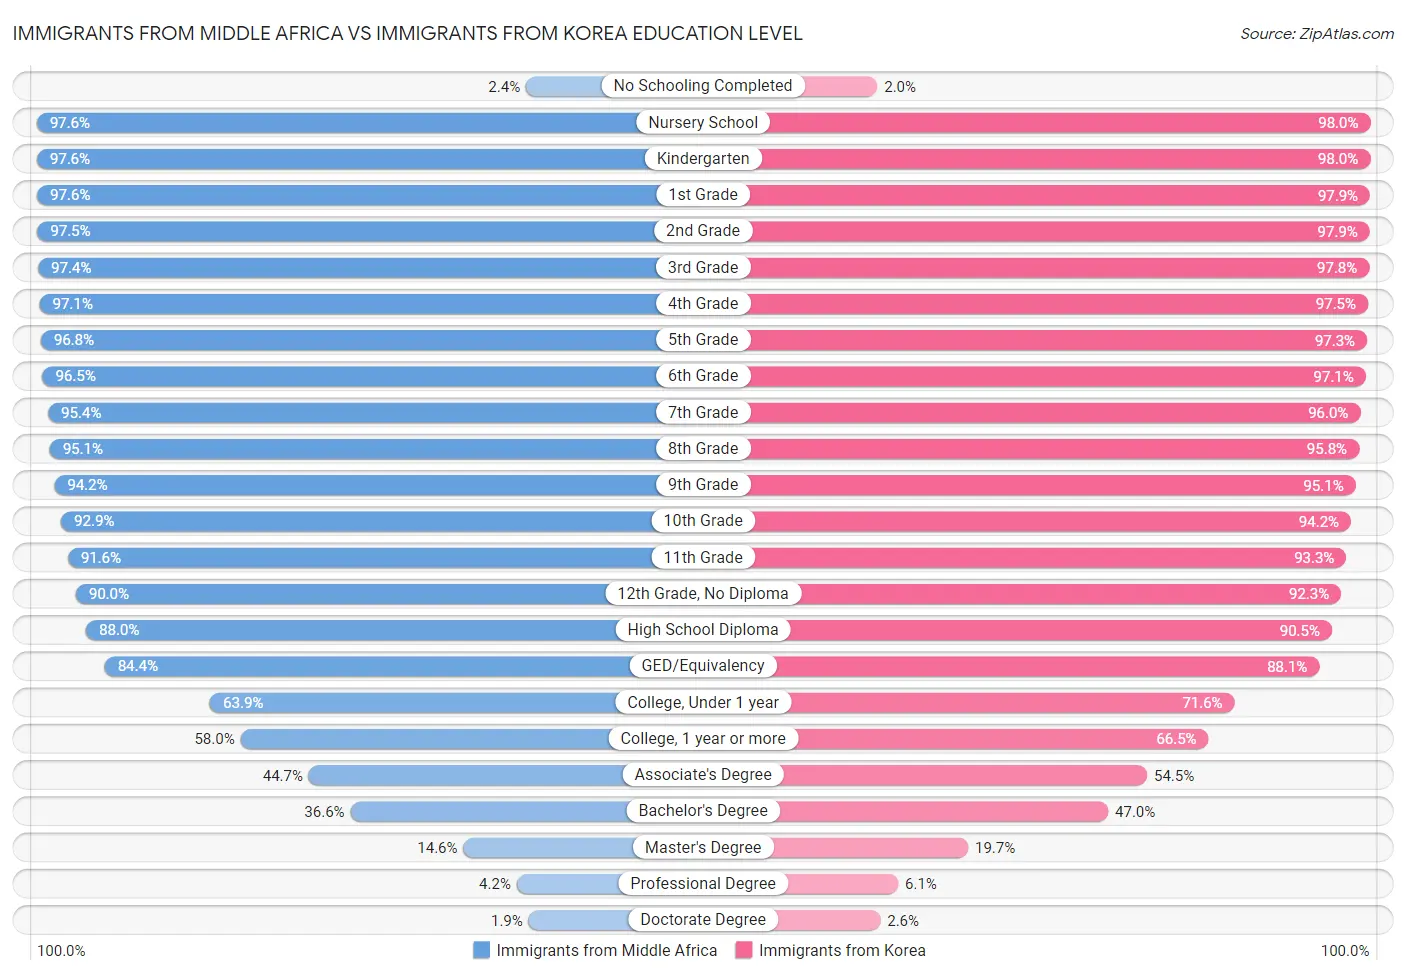 Immigrants from Middle Africa vs Immigrants from Korea Education Level